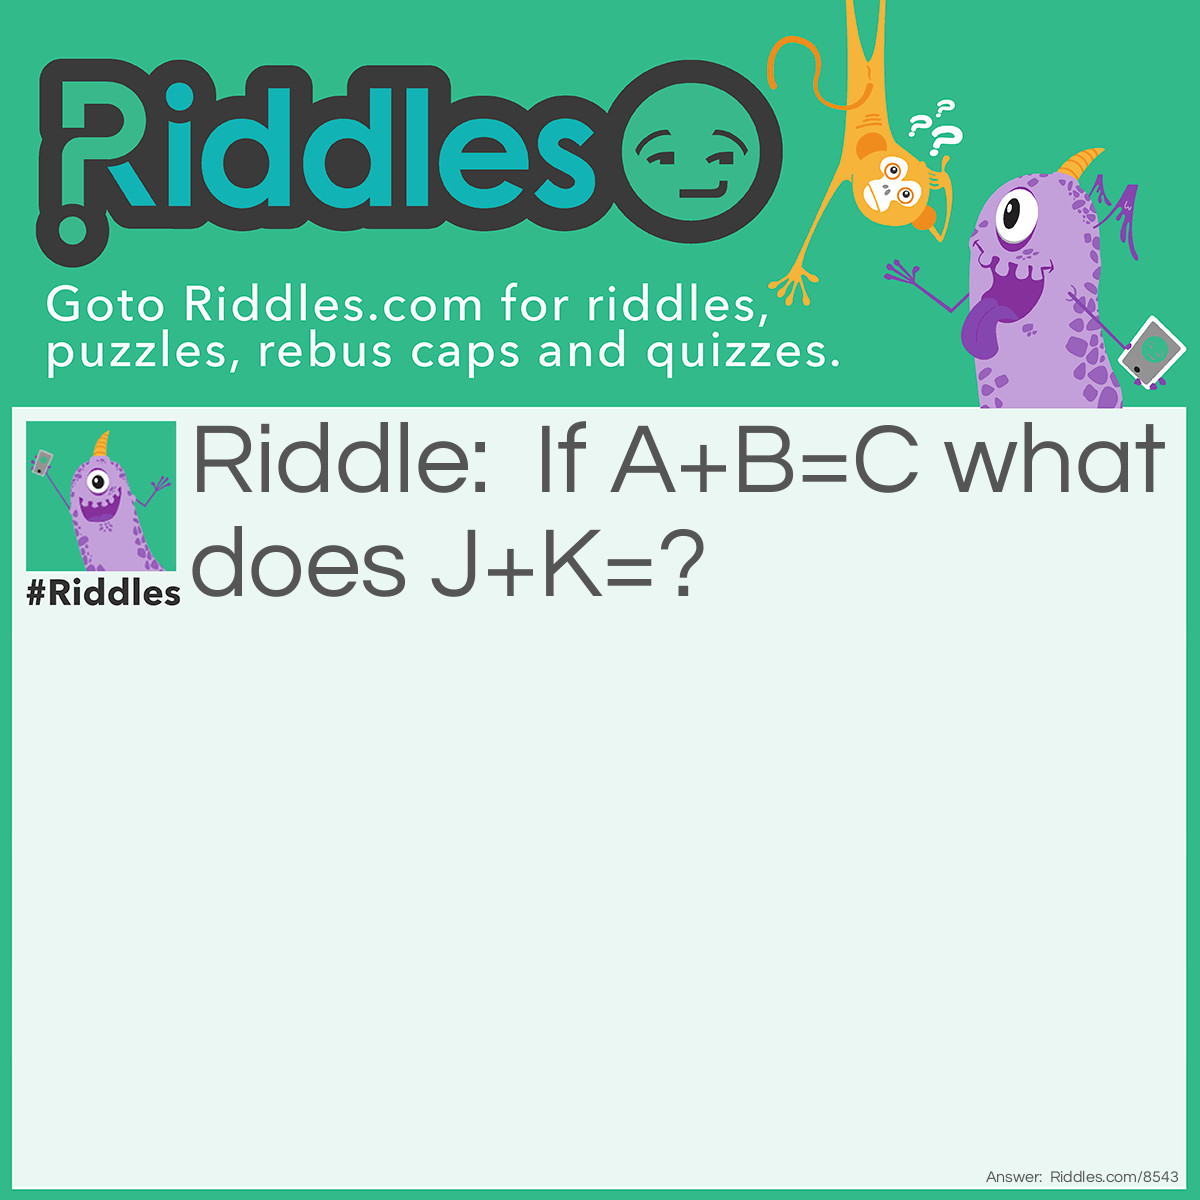 Riddle: If A+B=C what does J+K=? Answer: U.